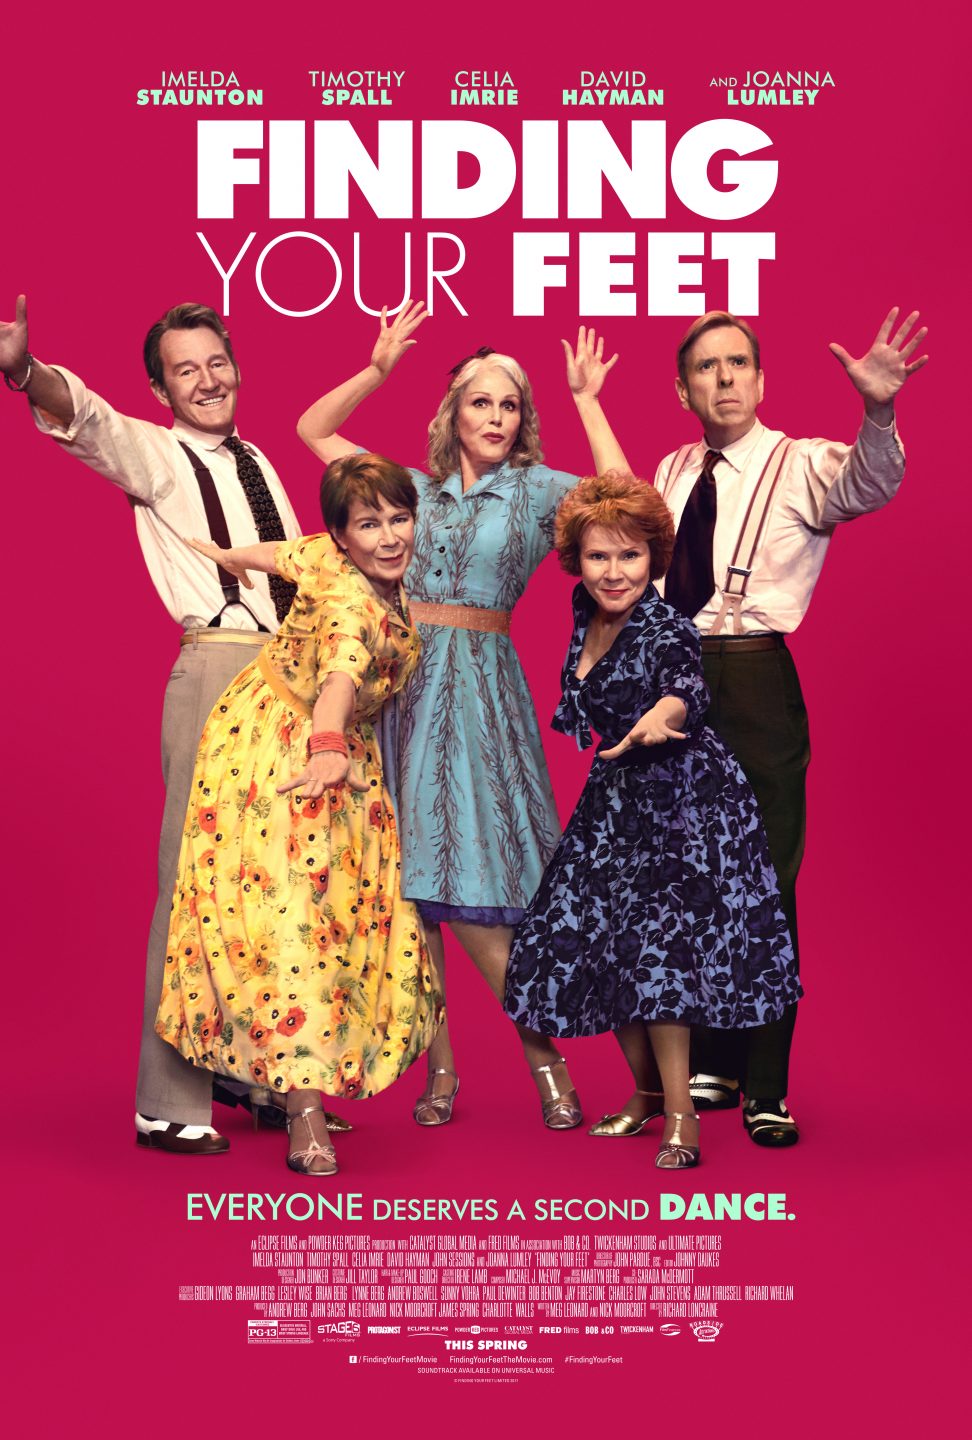 Finding Your Feet poster (Roadside Attractions)